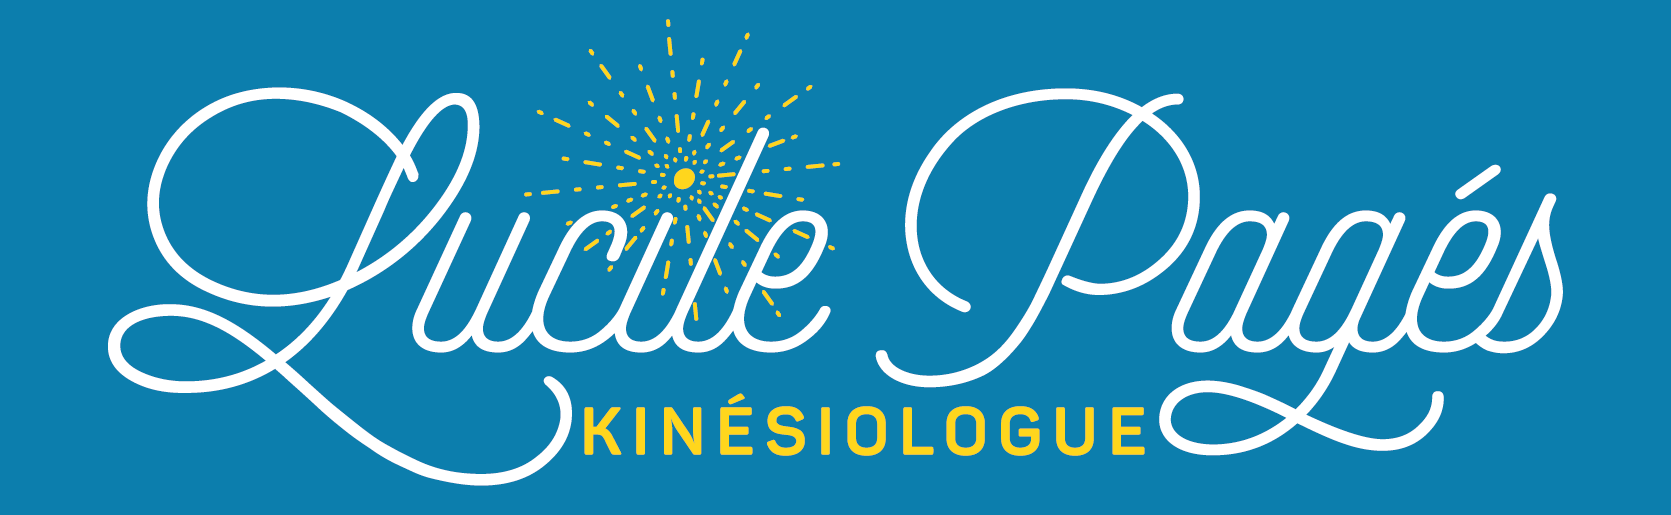 Lucile Pages – KinÃ©siologie - Bayonne, Anglet, Biarritz, Pays Basque